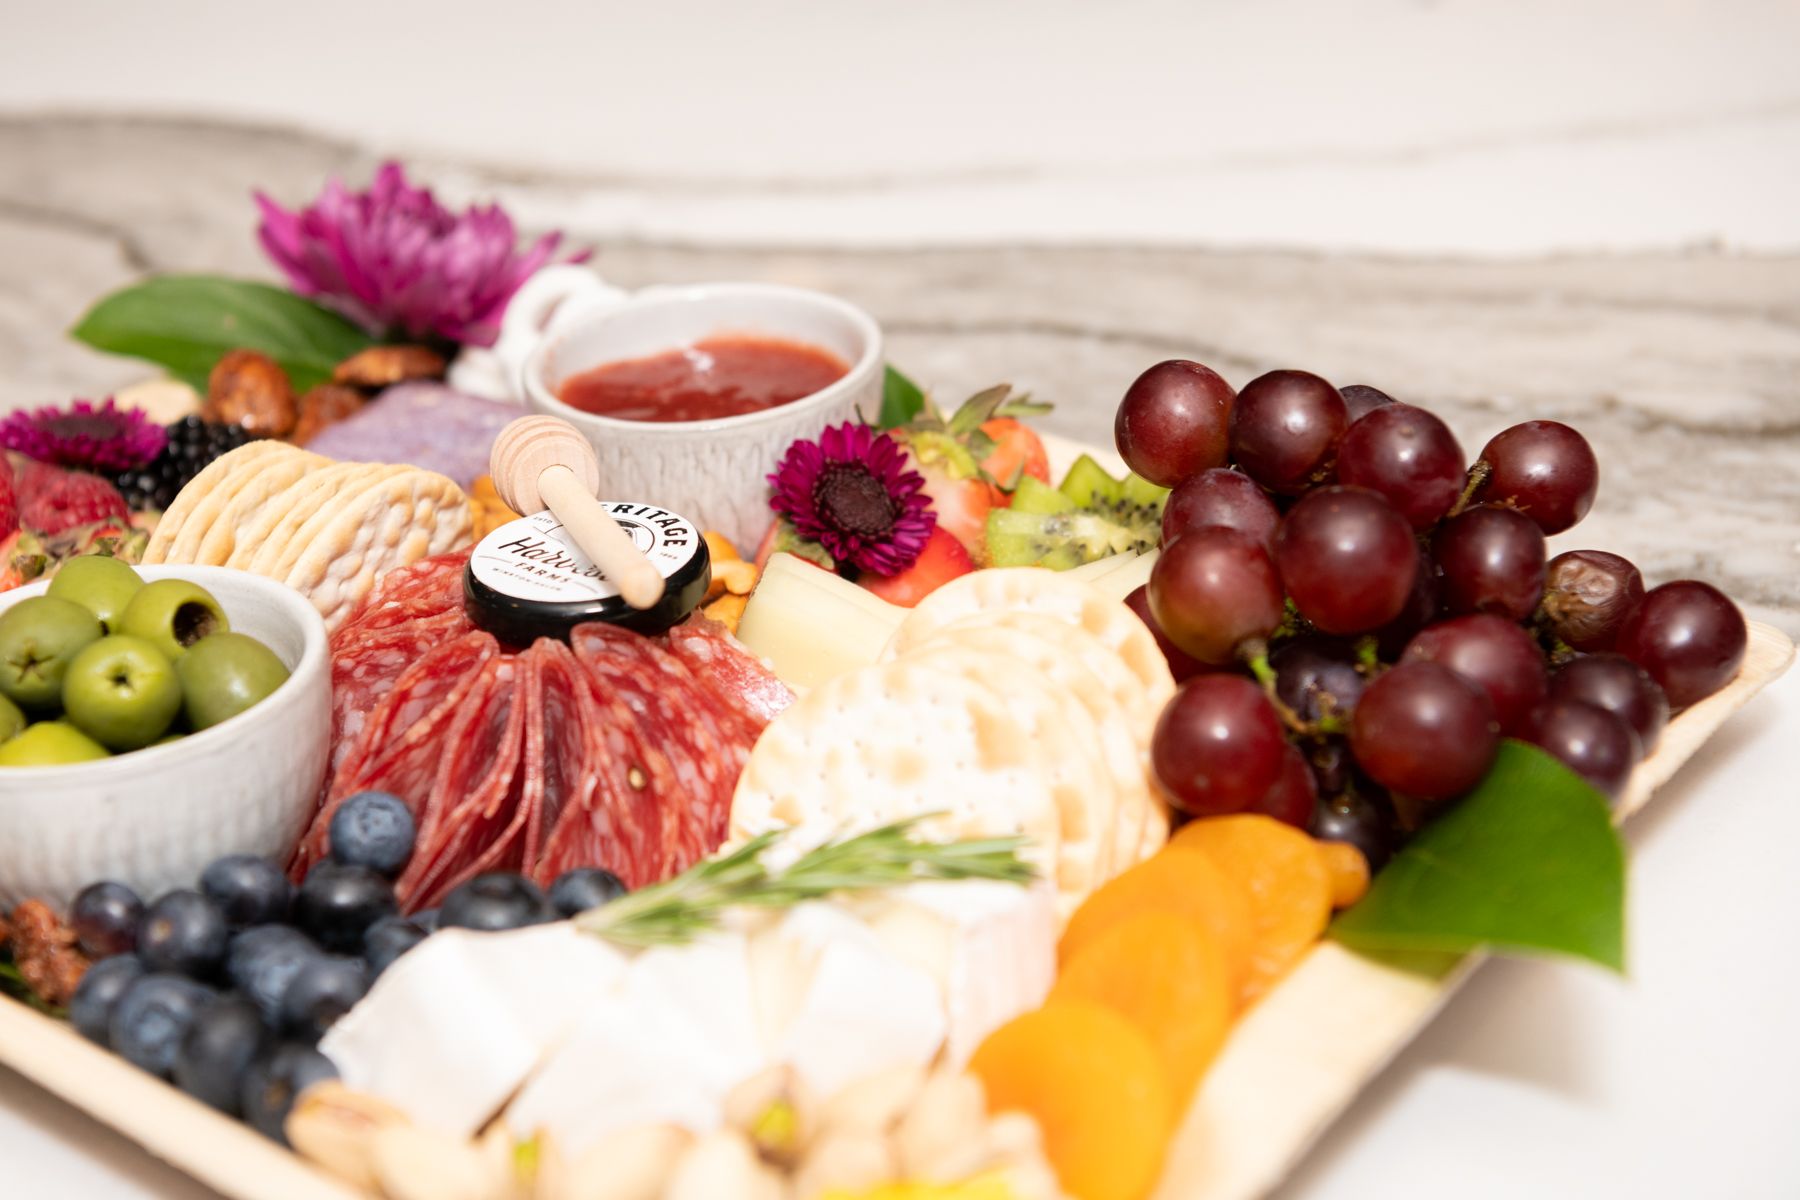 A charcuterie board designed by the Blooming Board.